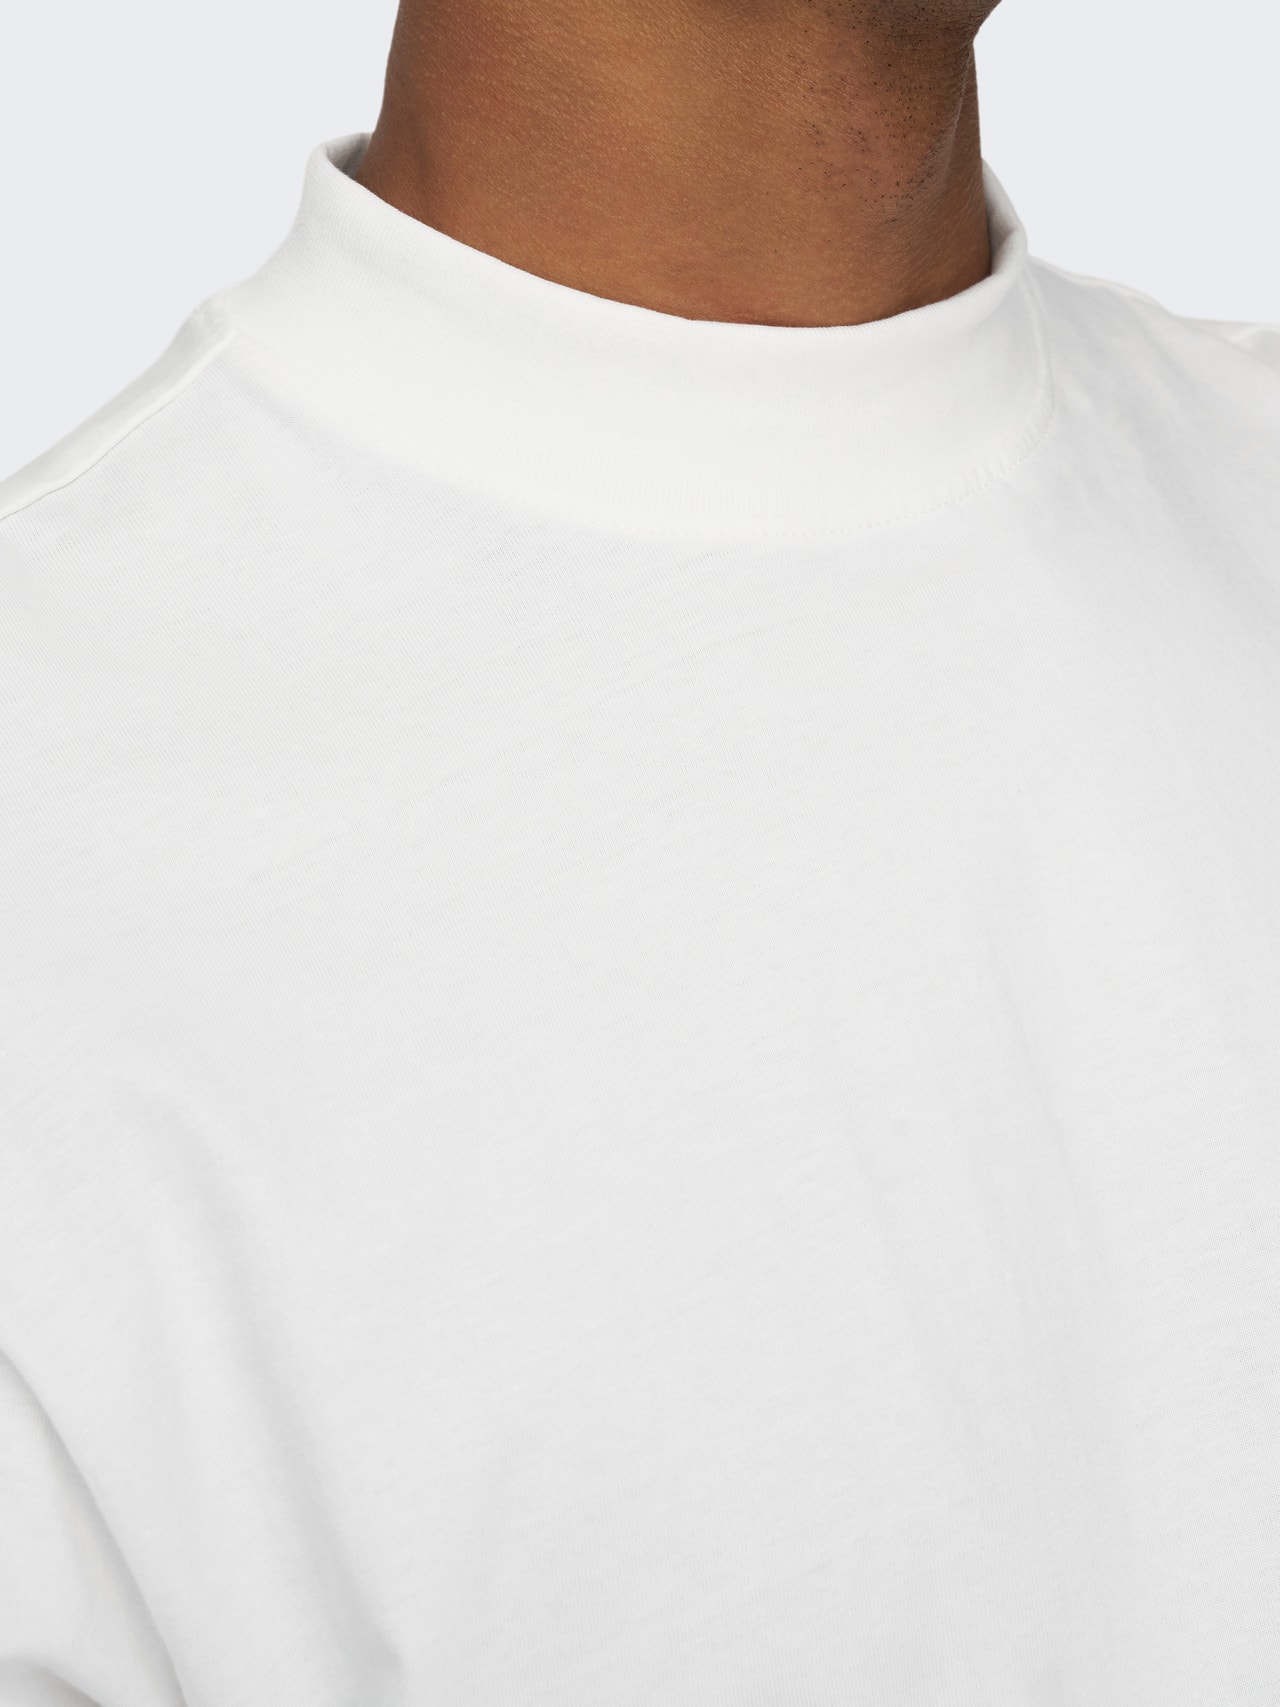 Relaxed Fit Mock neck T-Shirt, White